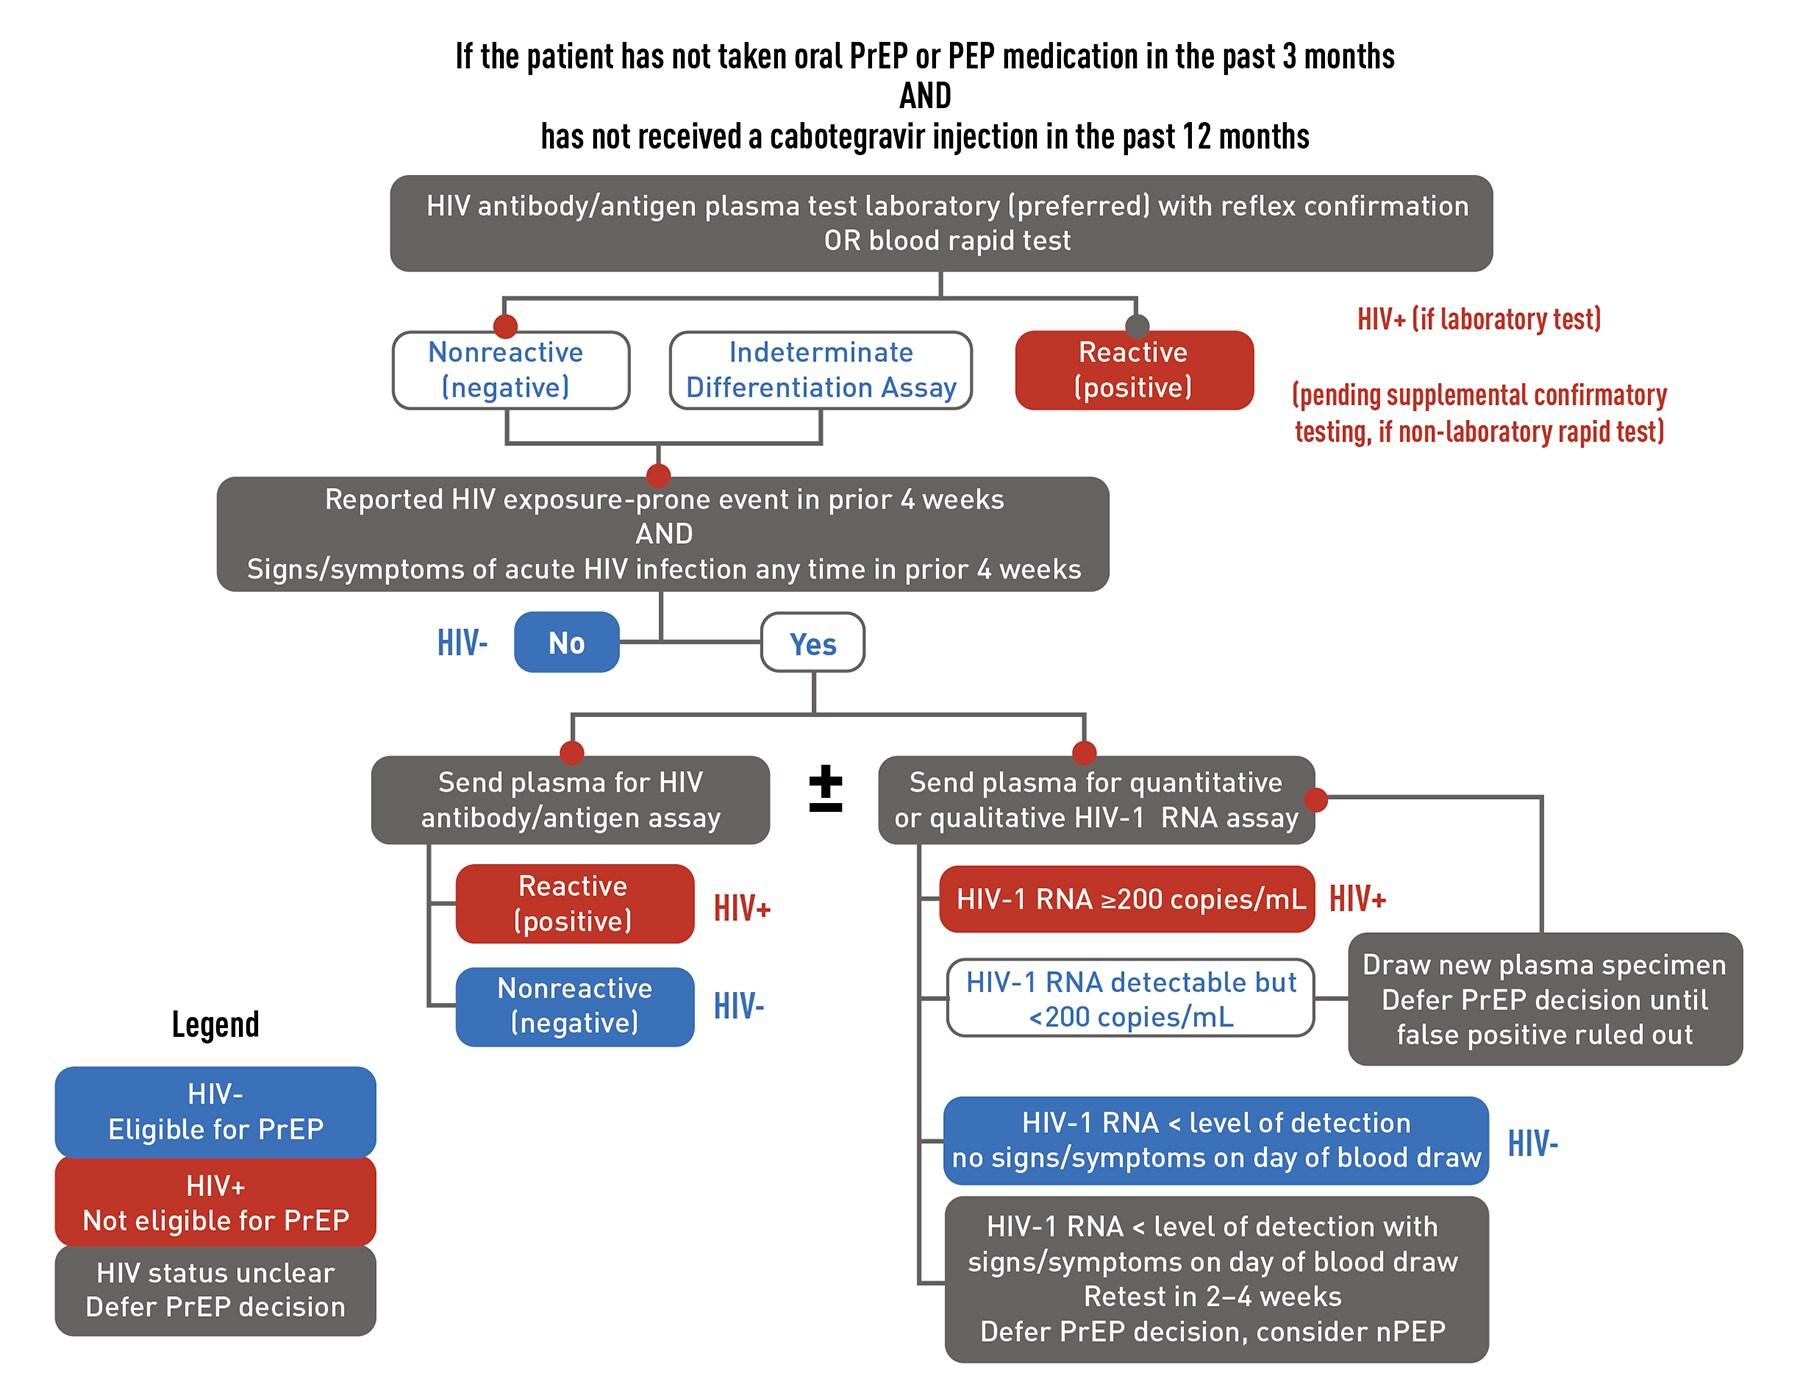 This flowchart describes HIV testing for a patient who has not taken oral PrEP or PEP medication in the past 3 months and who has not received a cabotegravir injection in the past 12 months.